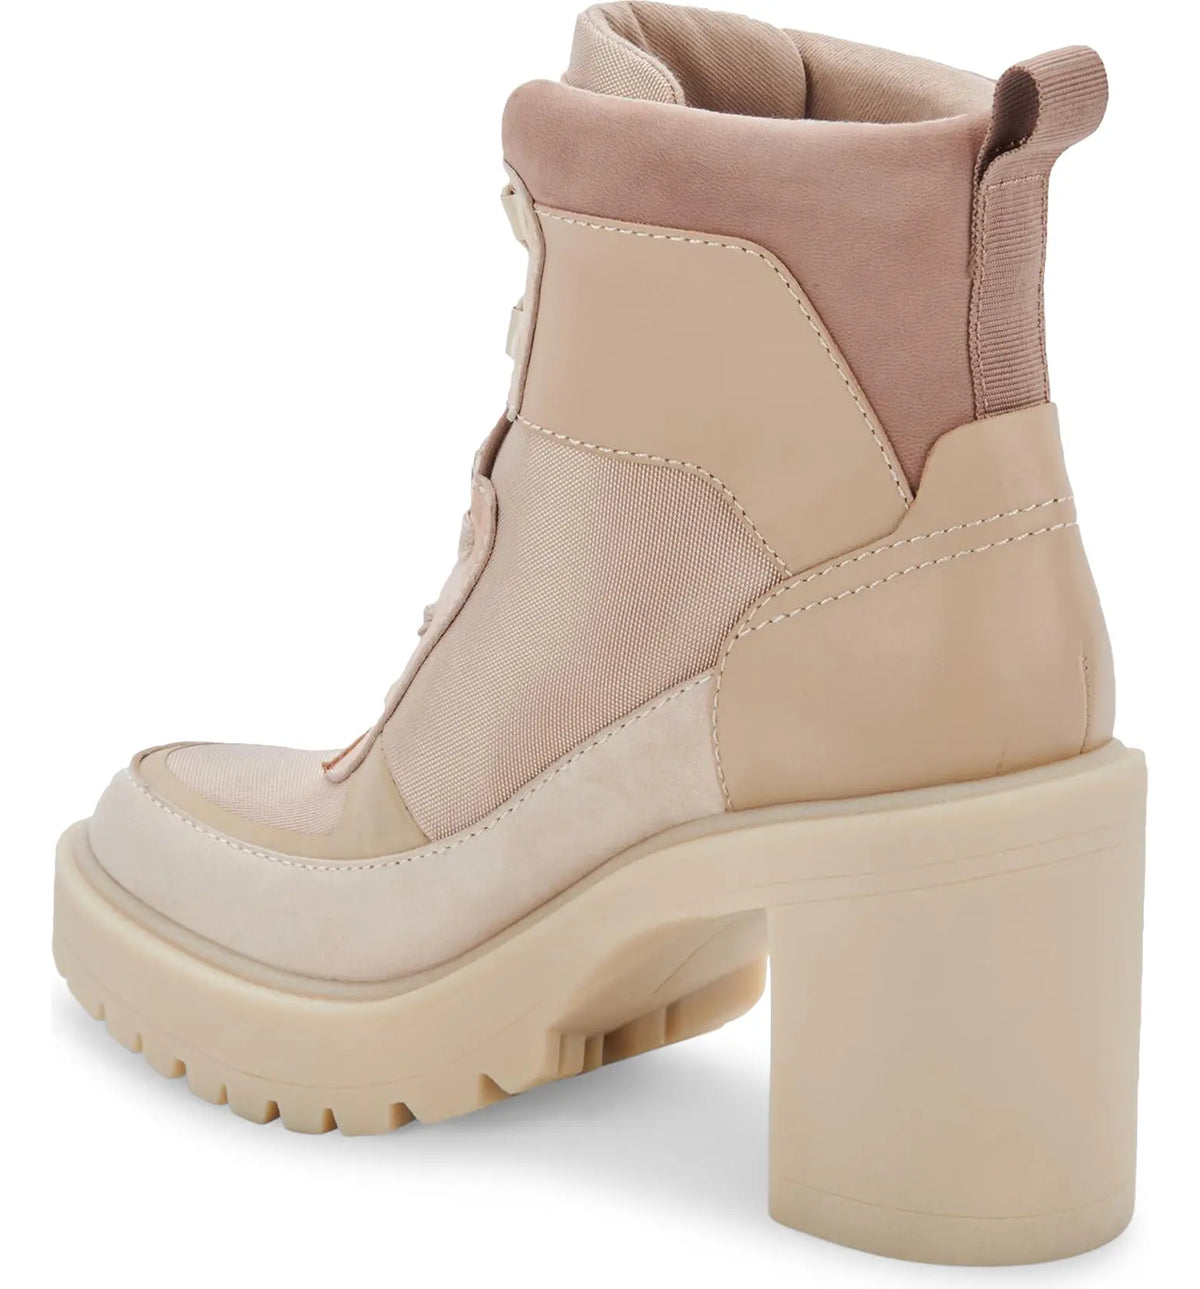 Dolce Vita Collin Booties in Taupe